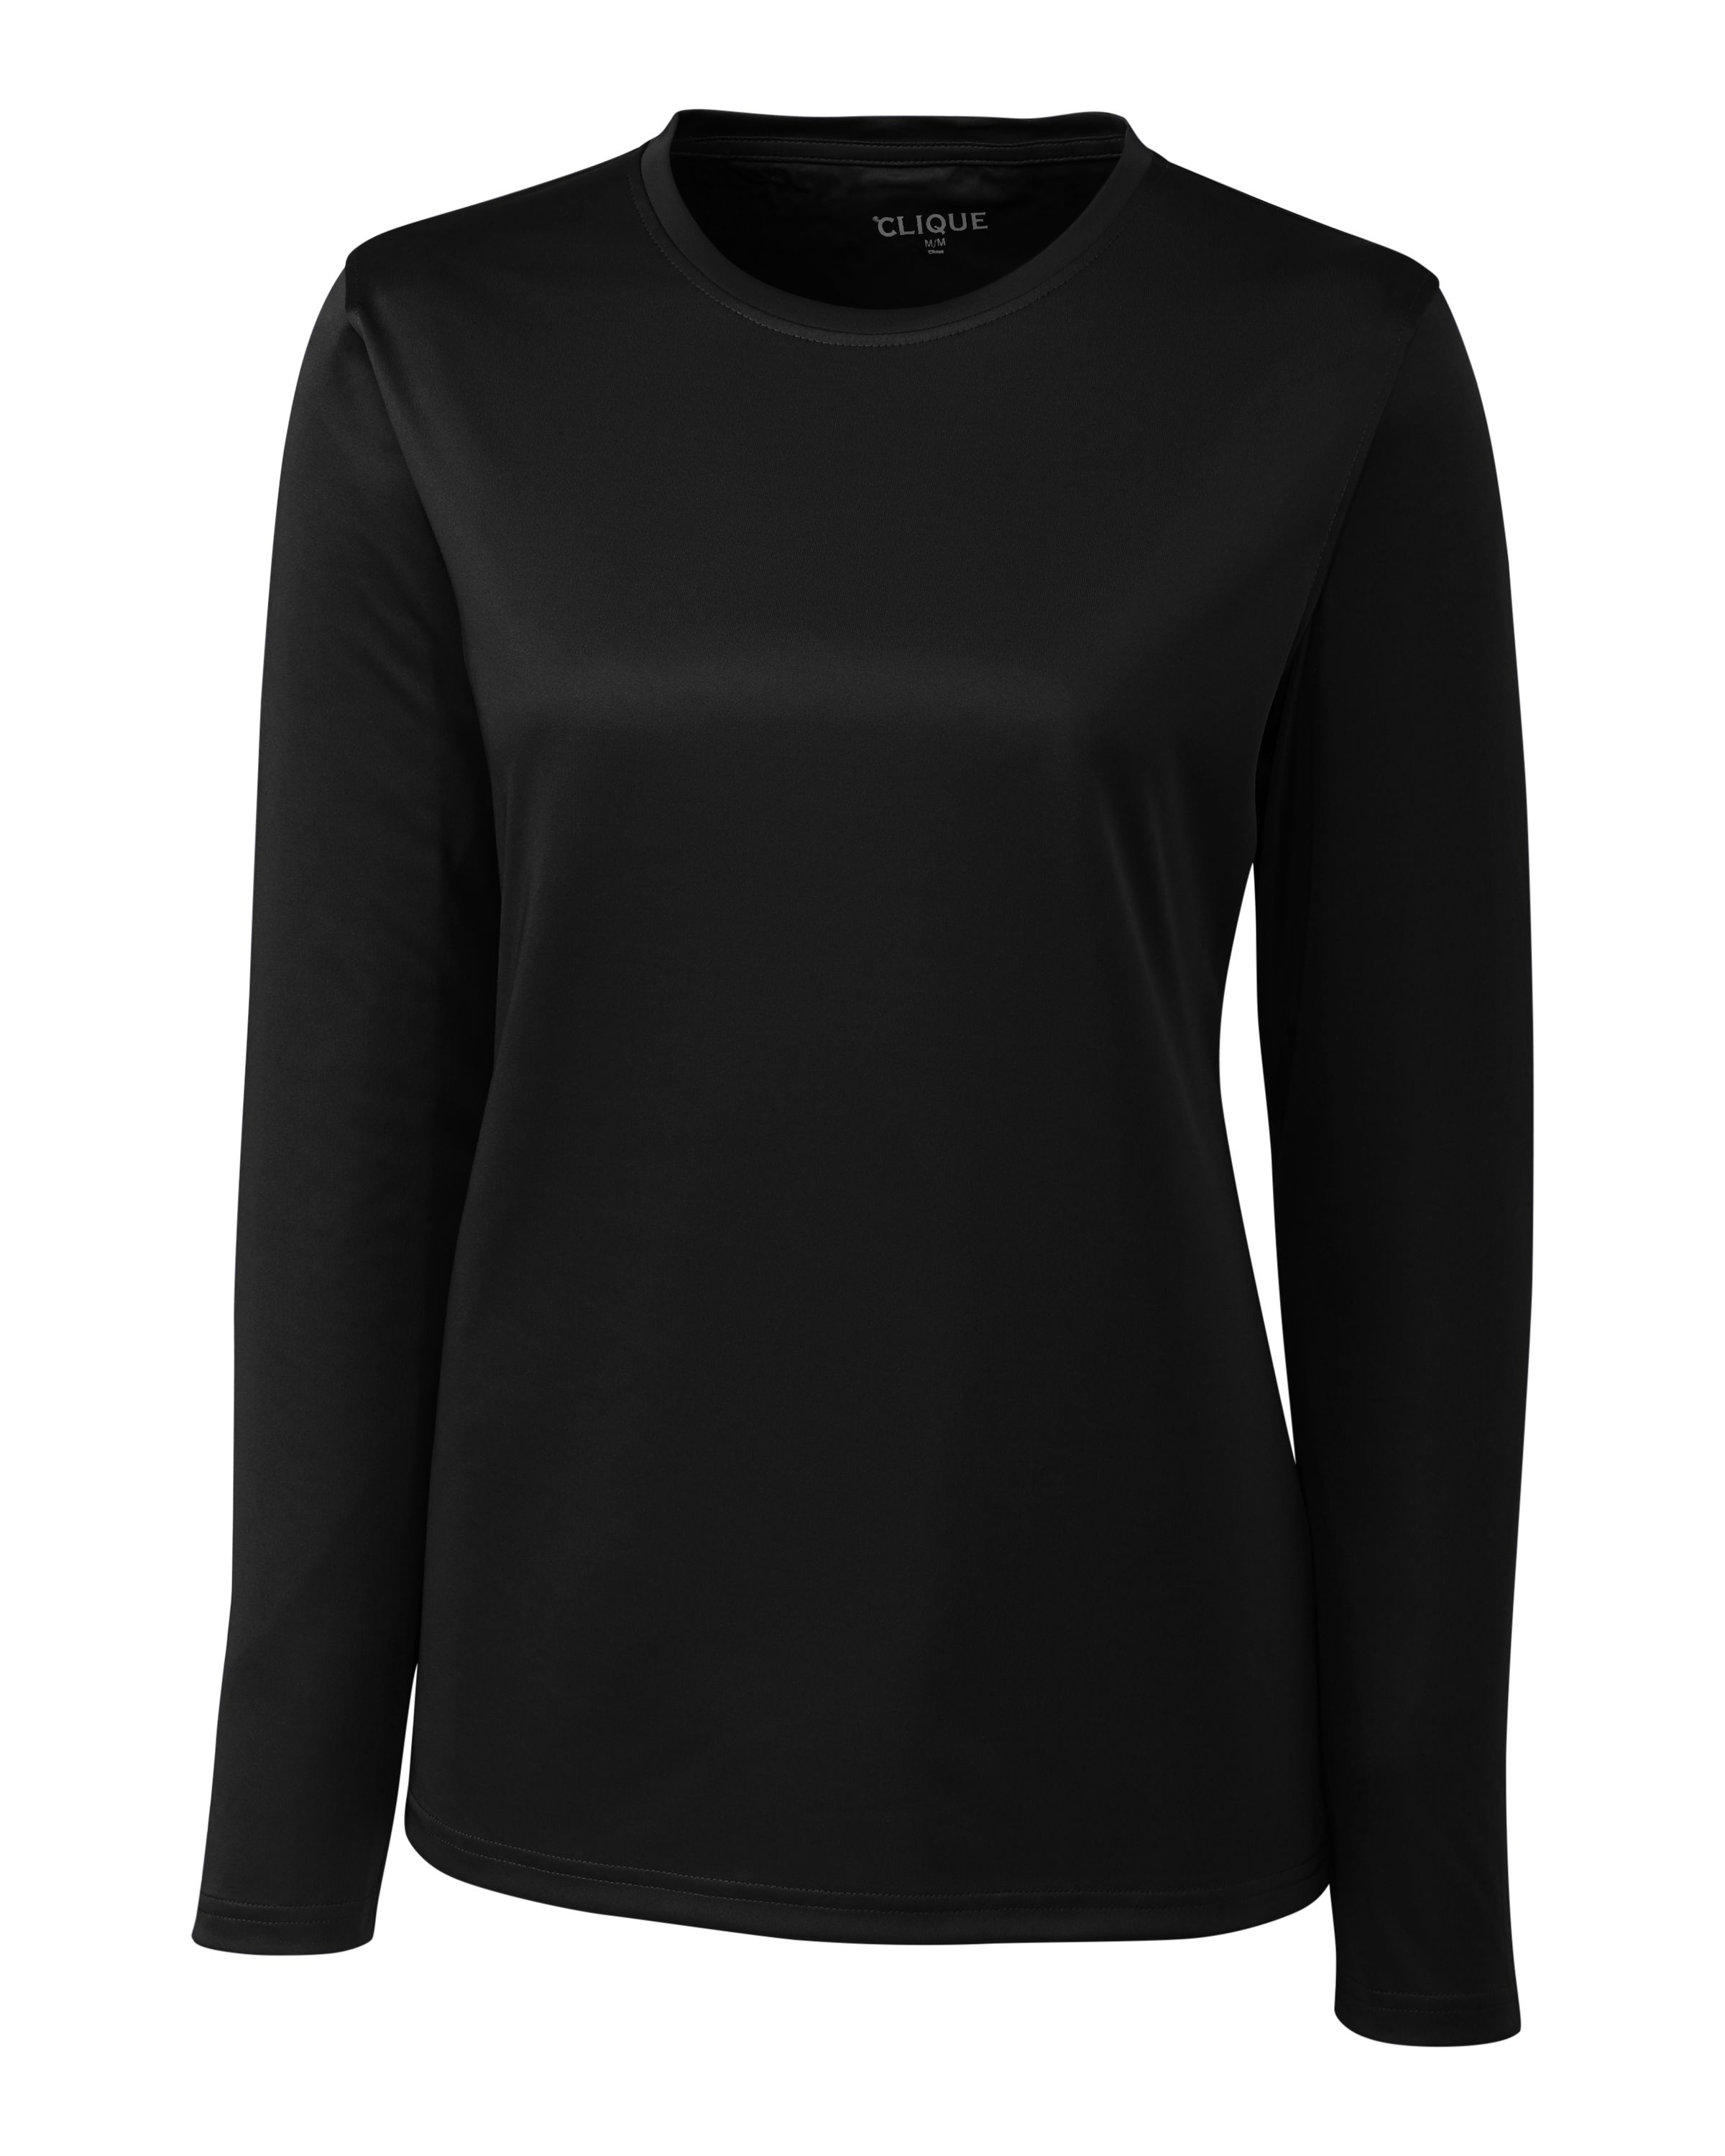 Clique Spin Eco Performance Long Sleeve Womens Tee Shirt-